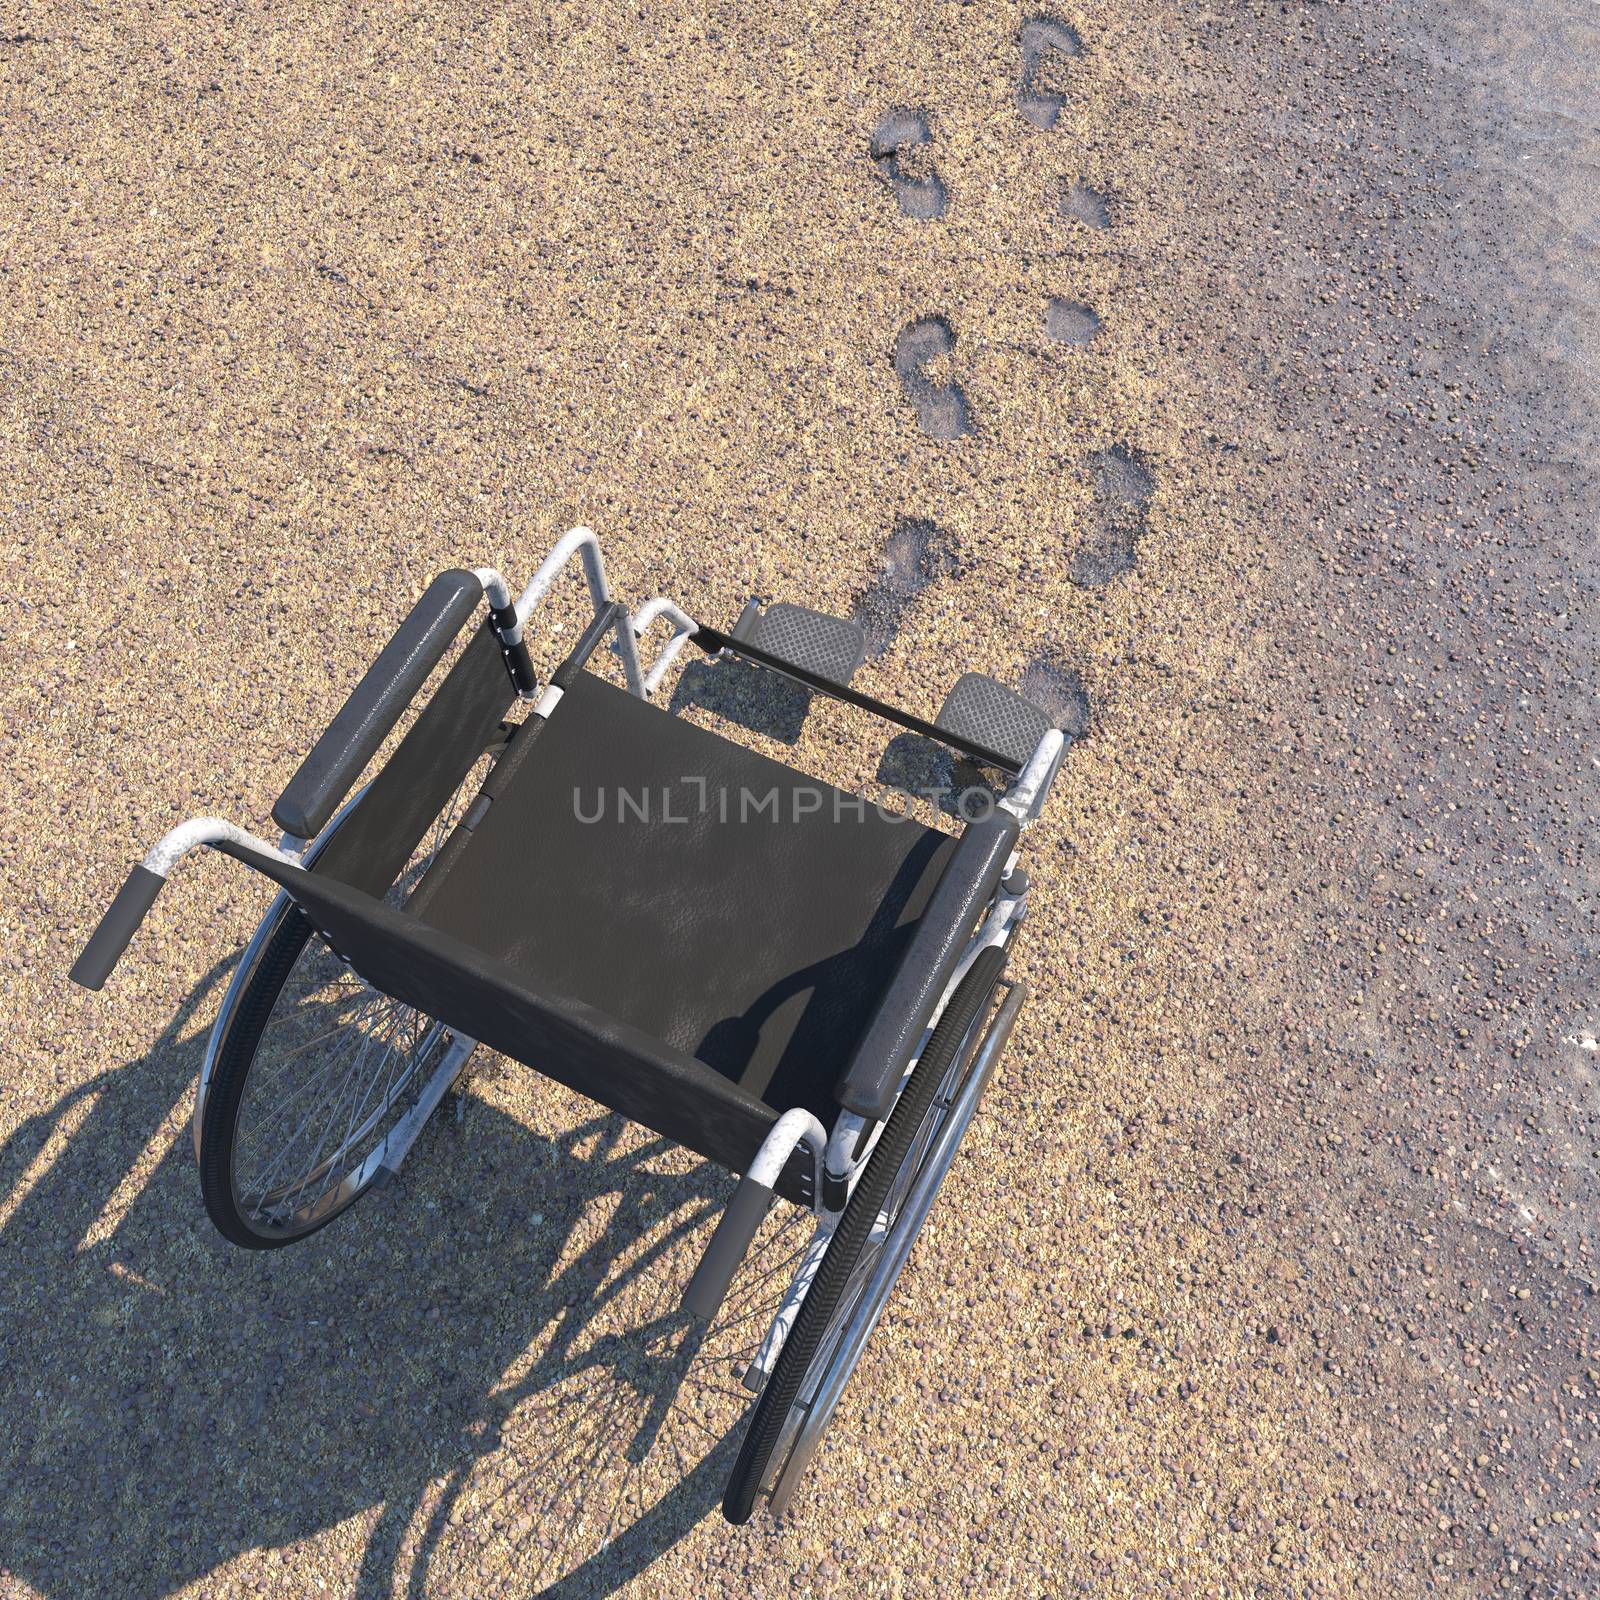 Empty wheelchair on a beach of sand with footprints concept background